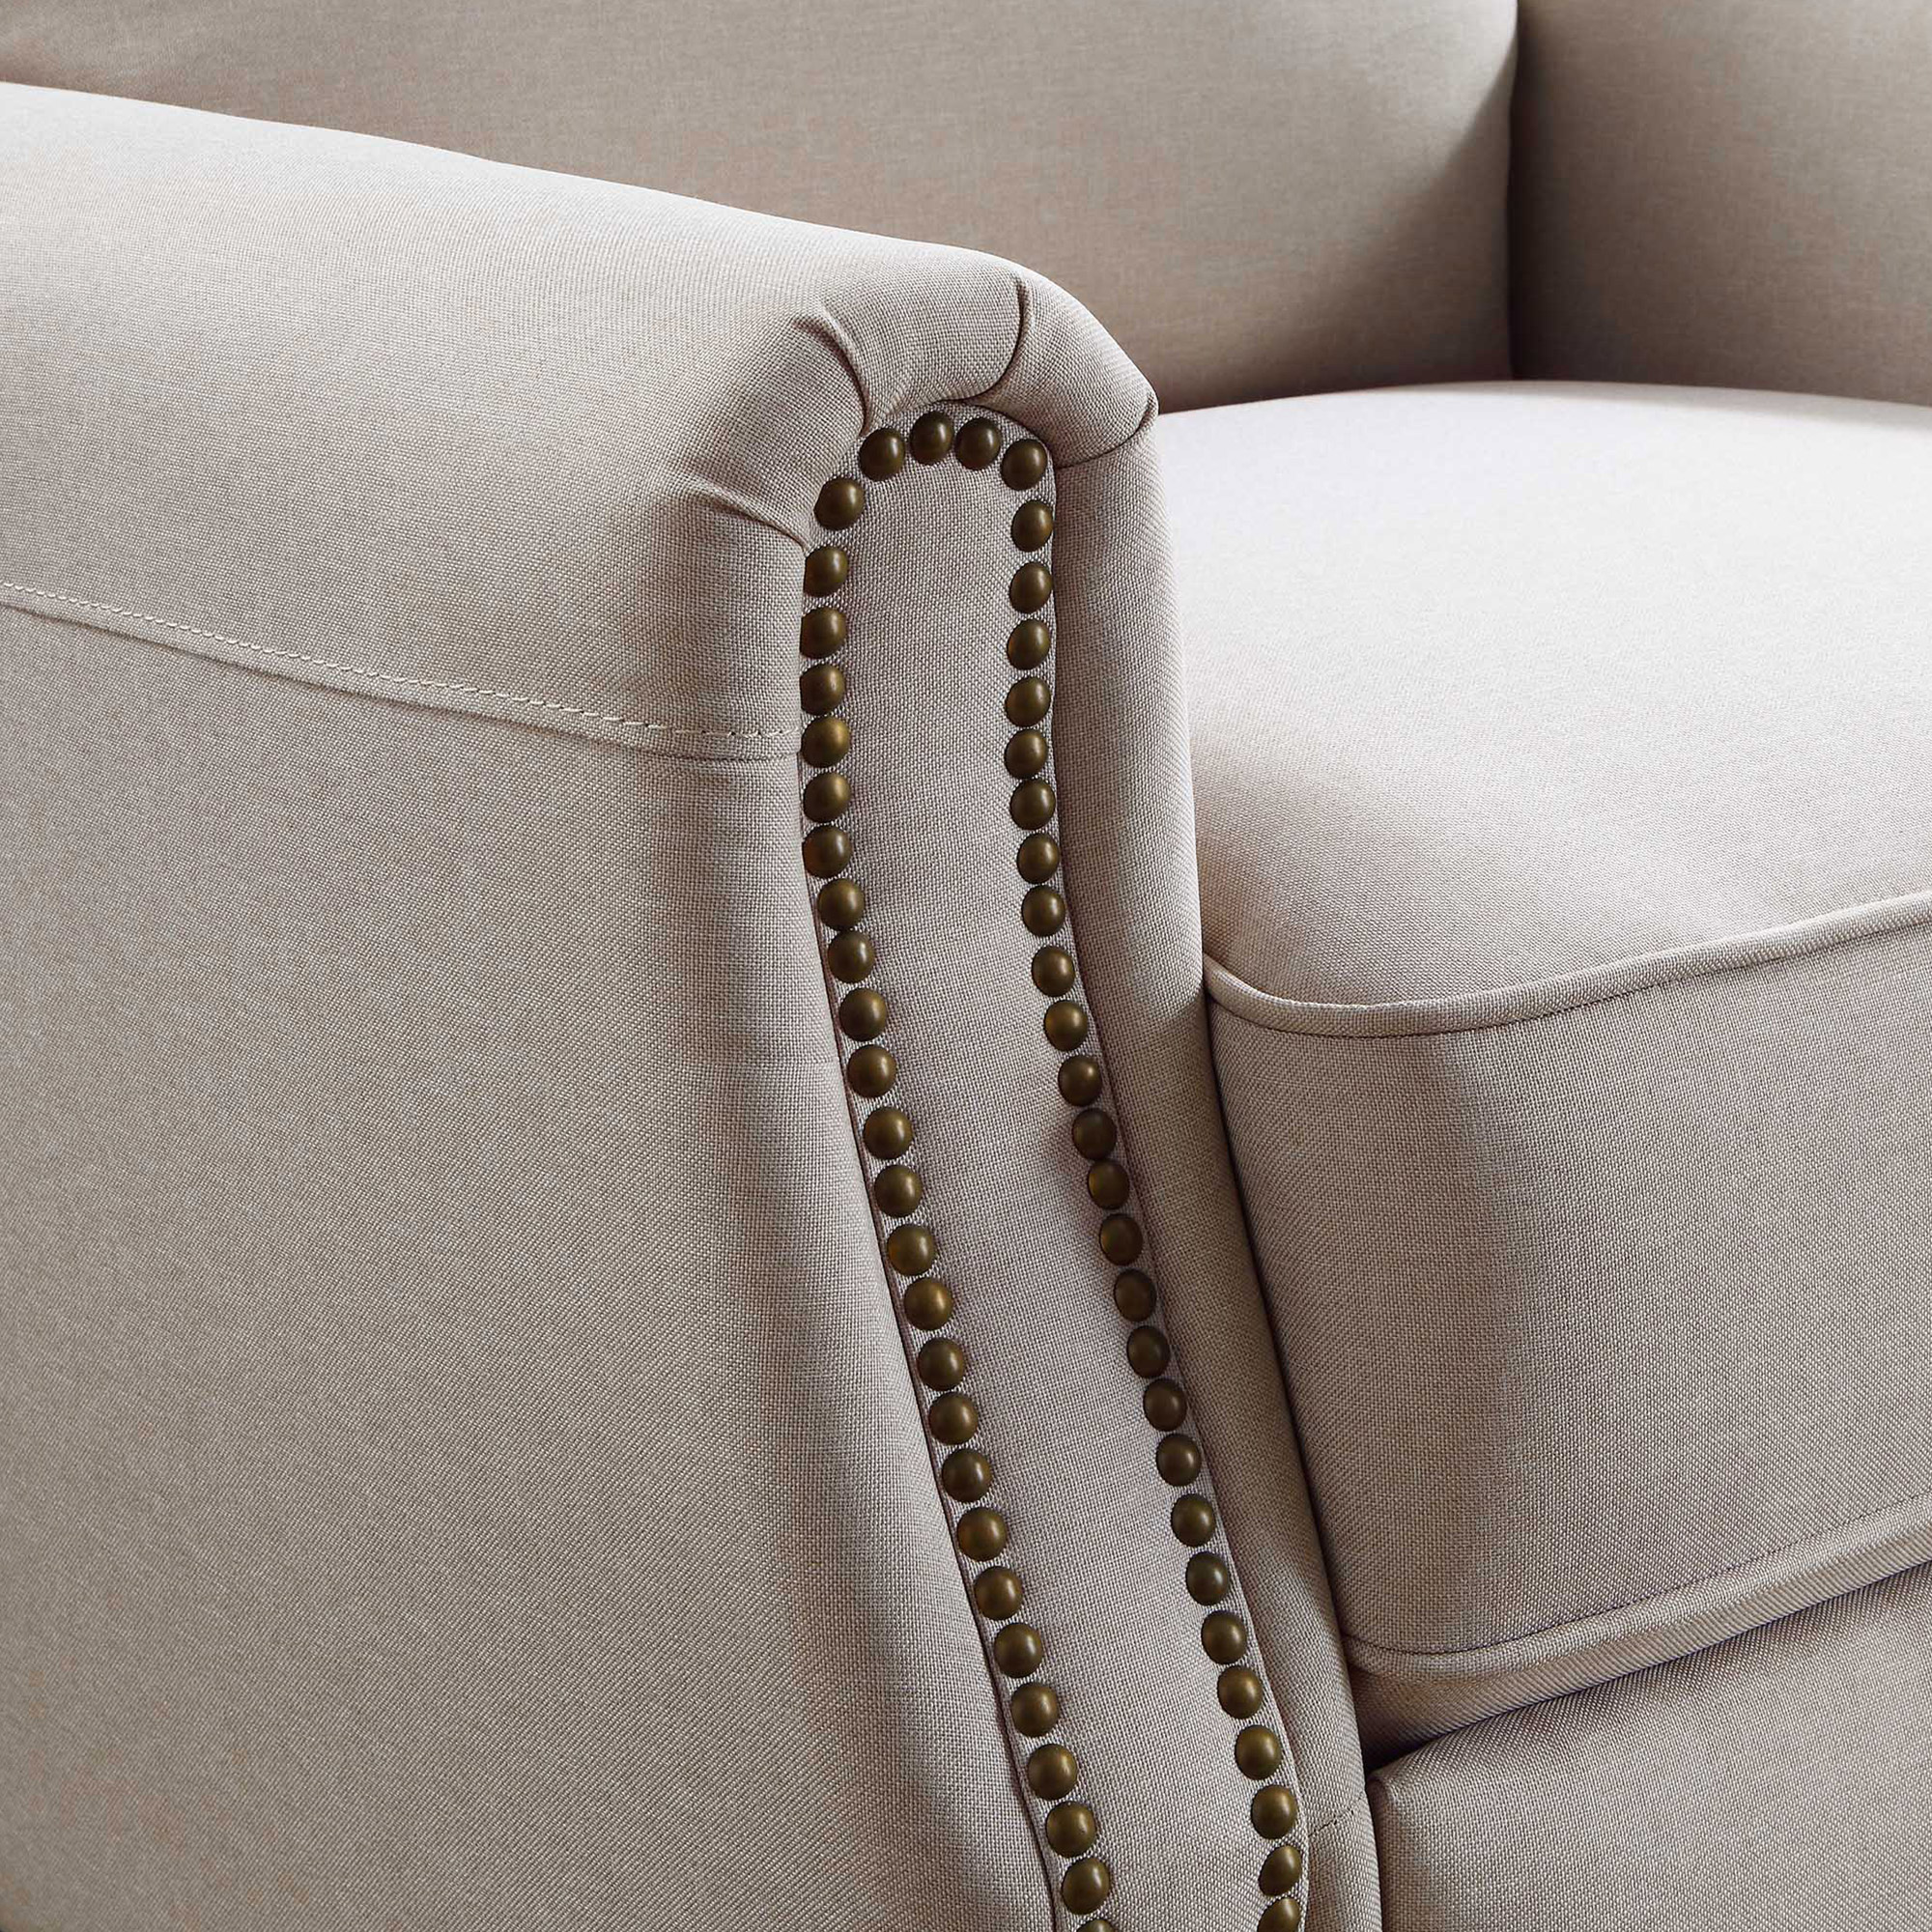 Better Homes and Gardens Pushback Recliner, Taupe Fabric Upholstery - image 7 of 7